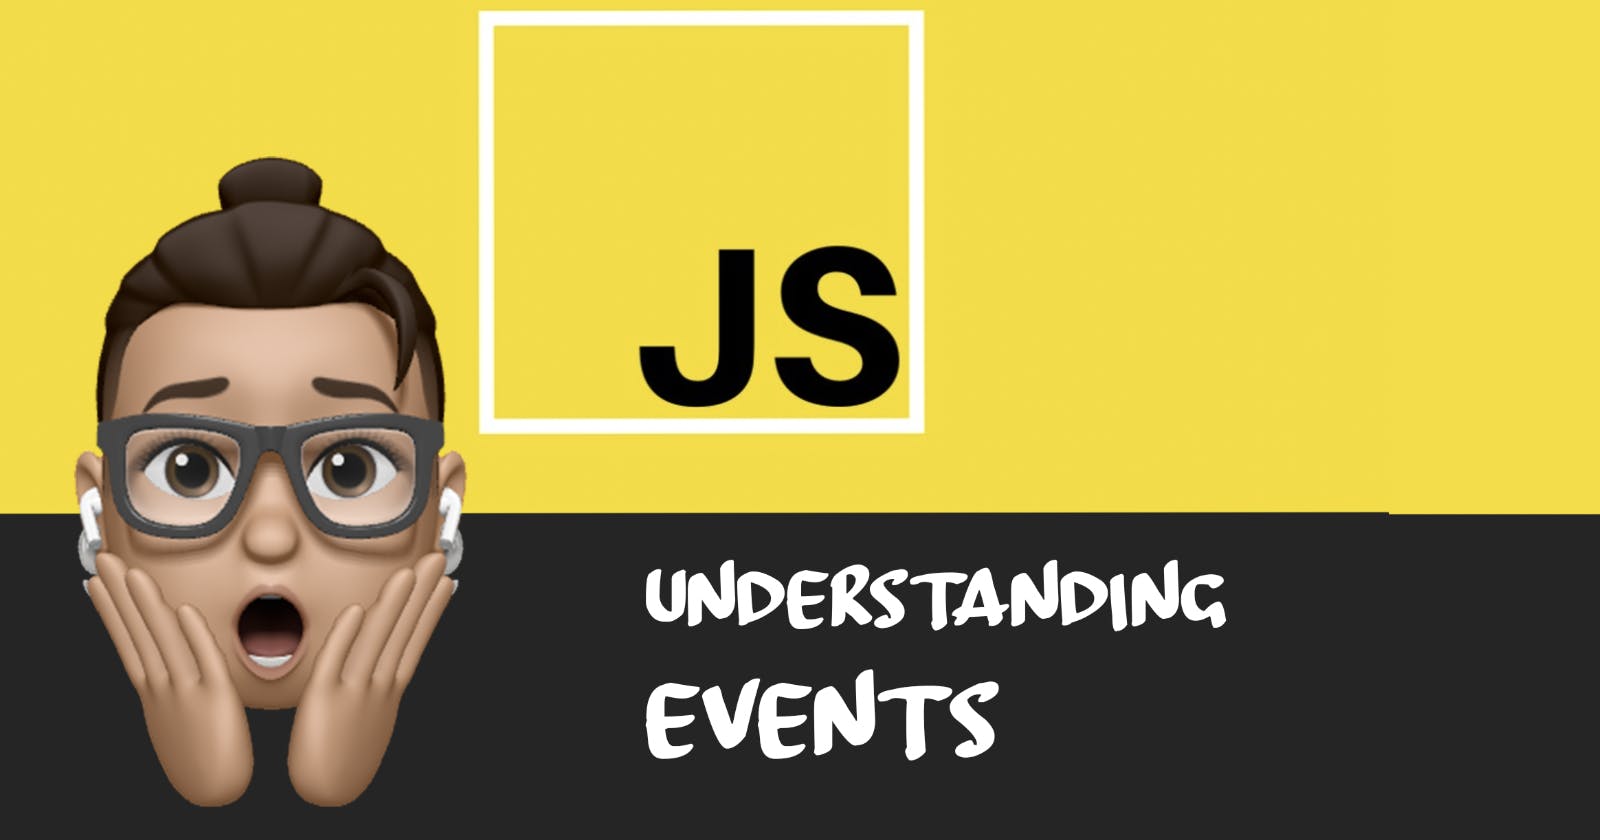 JavaScript Events... (this is cool)